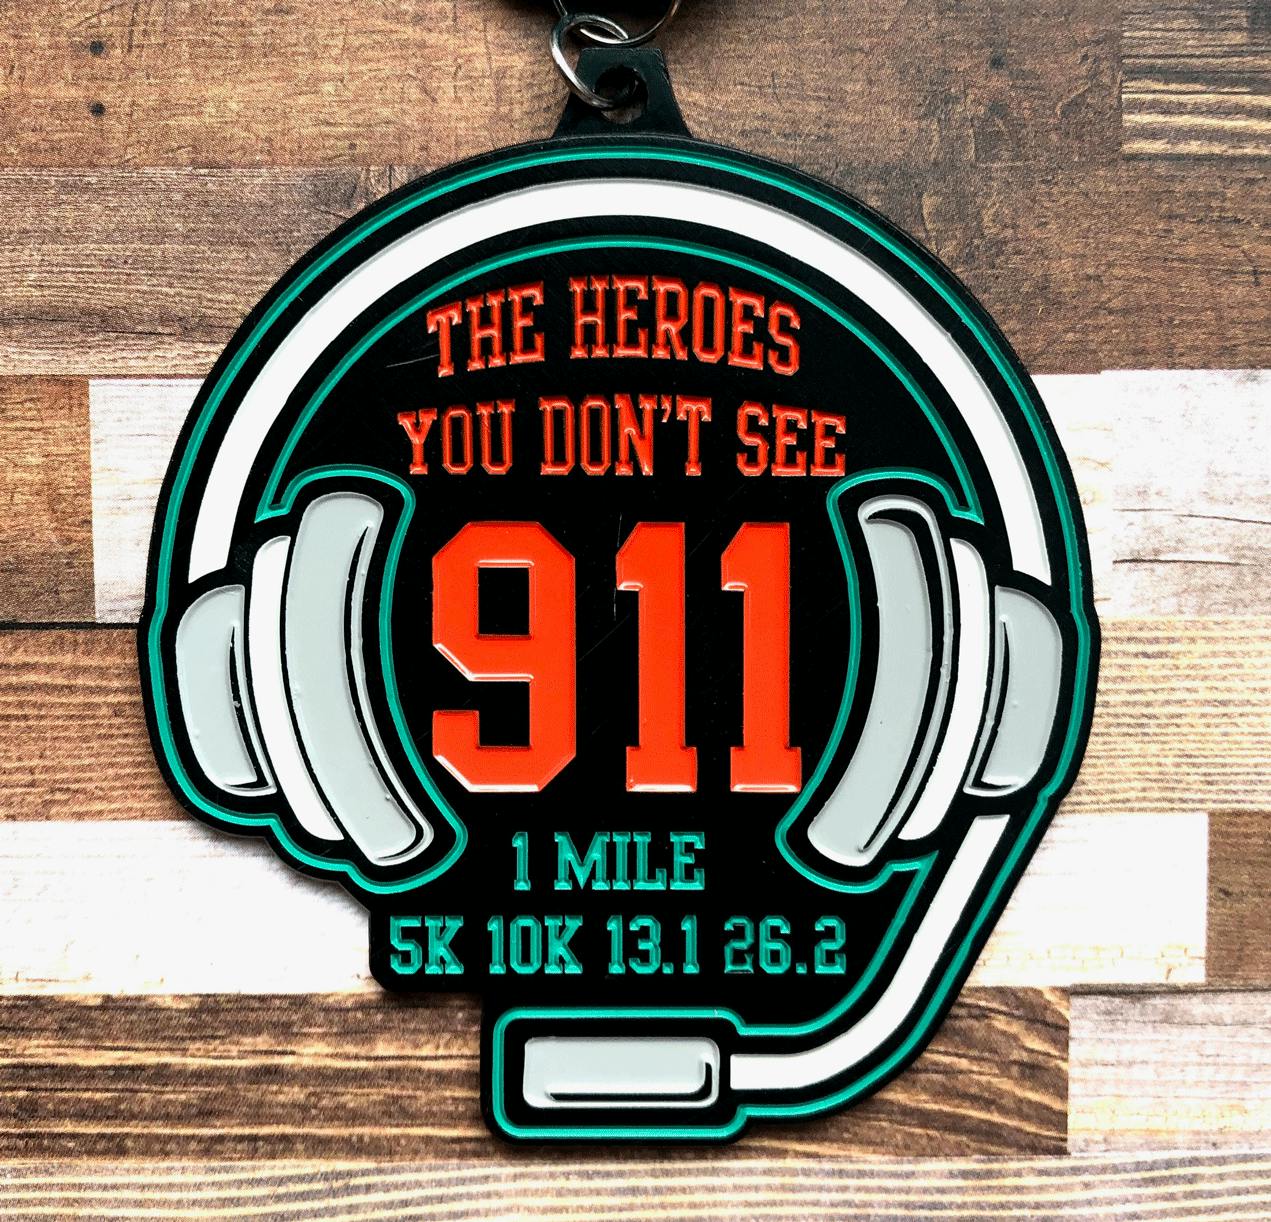 The Heroes You Don't See 1 M 5K 10K 13.1 26.2 -Dayton